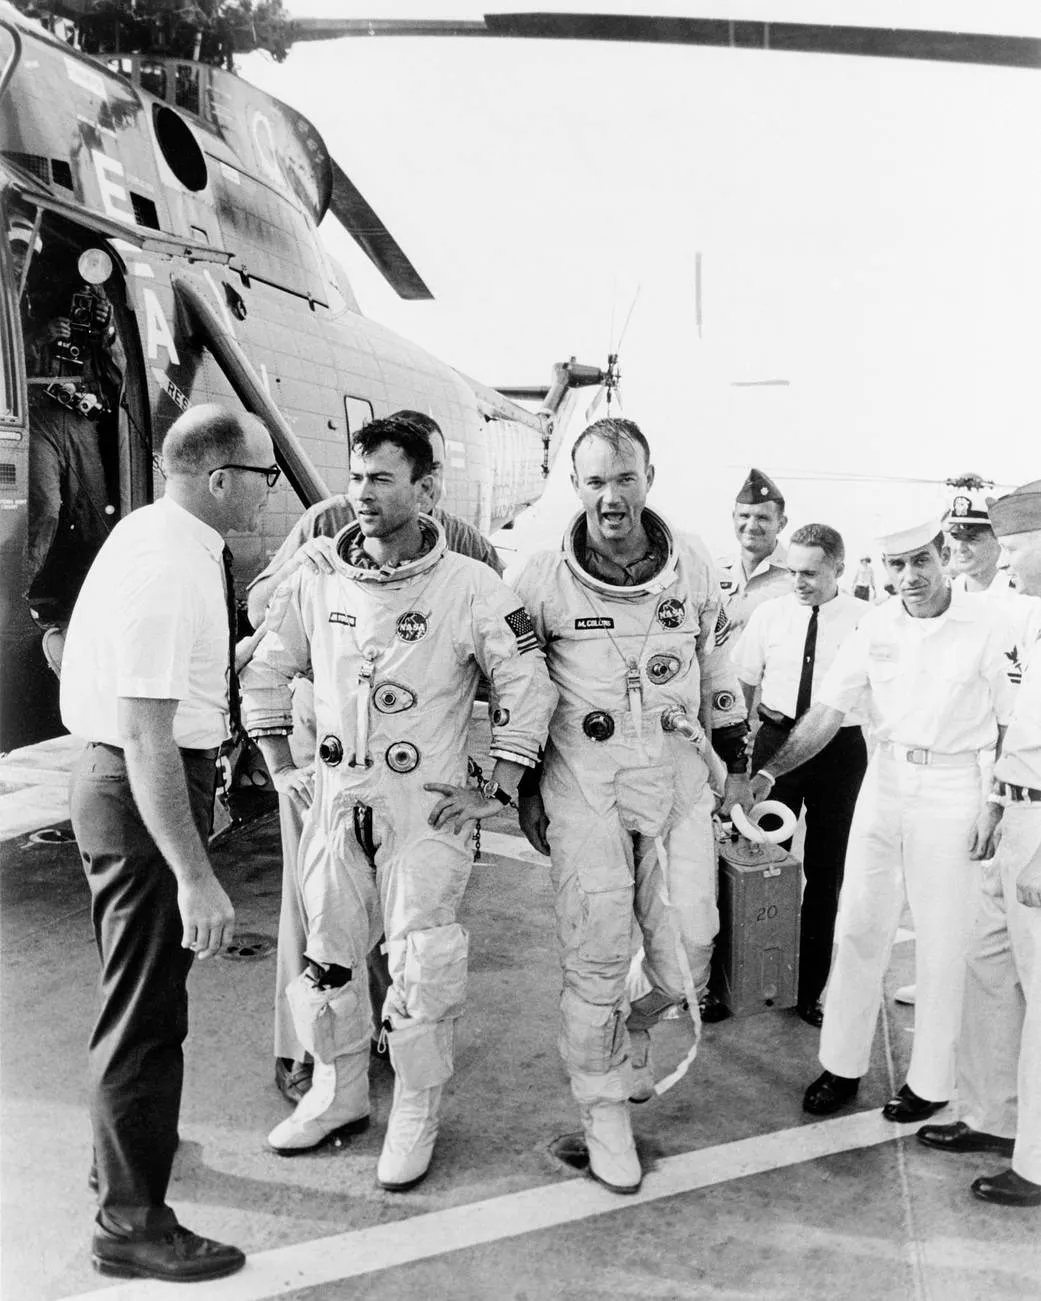 Astronauts John Young (left) and Michael Collins (right) on the recovery ship USS Guadalcanal on 21 July 1966, following successful splashdown of the Gemini 10 mission. Credit: NASA